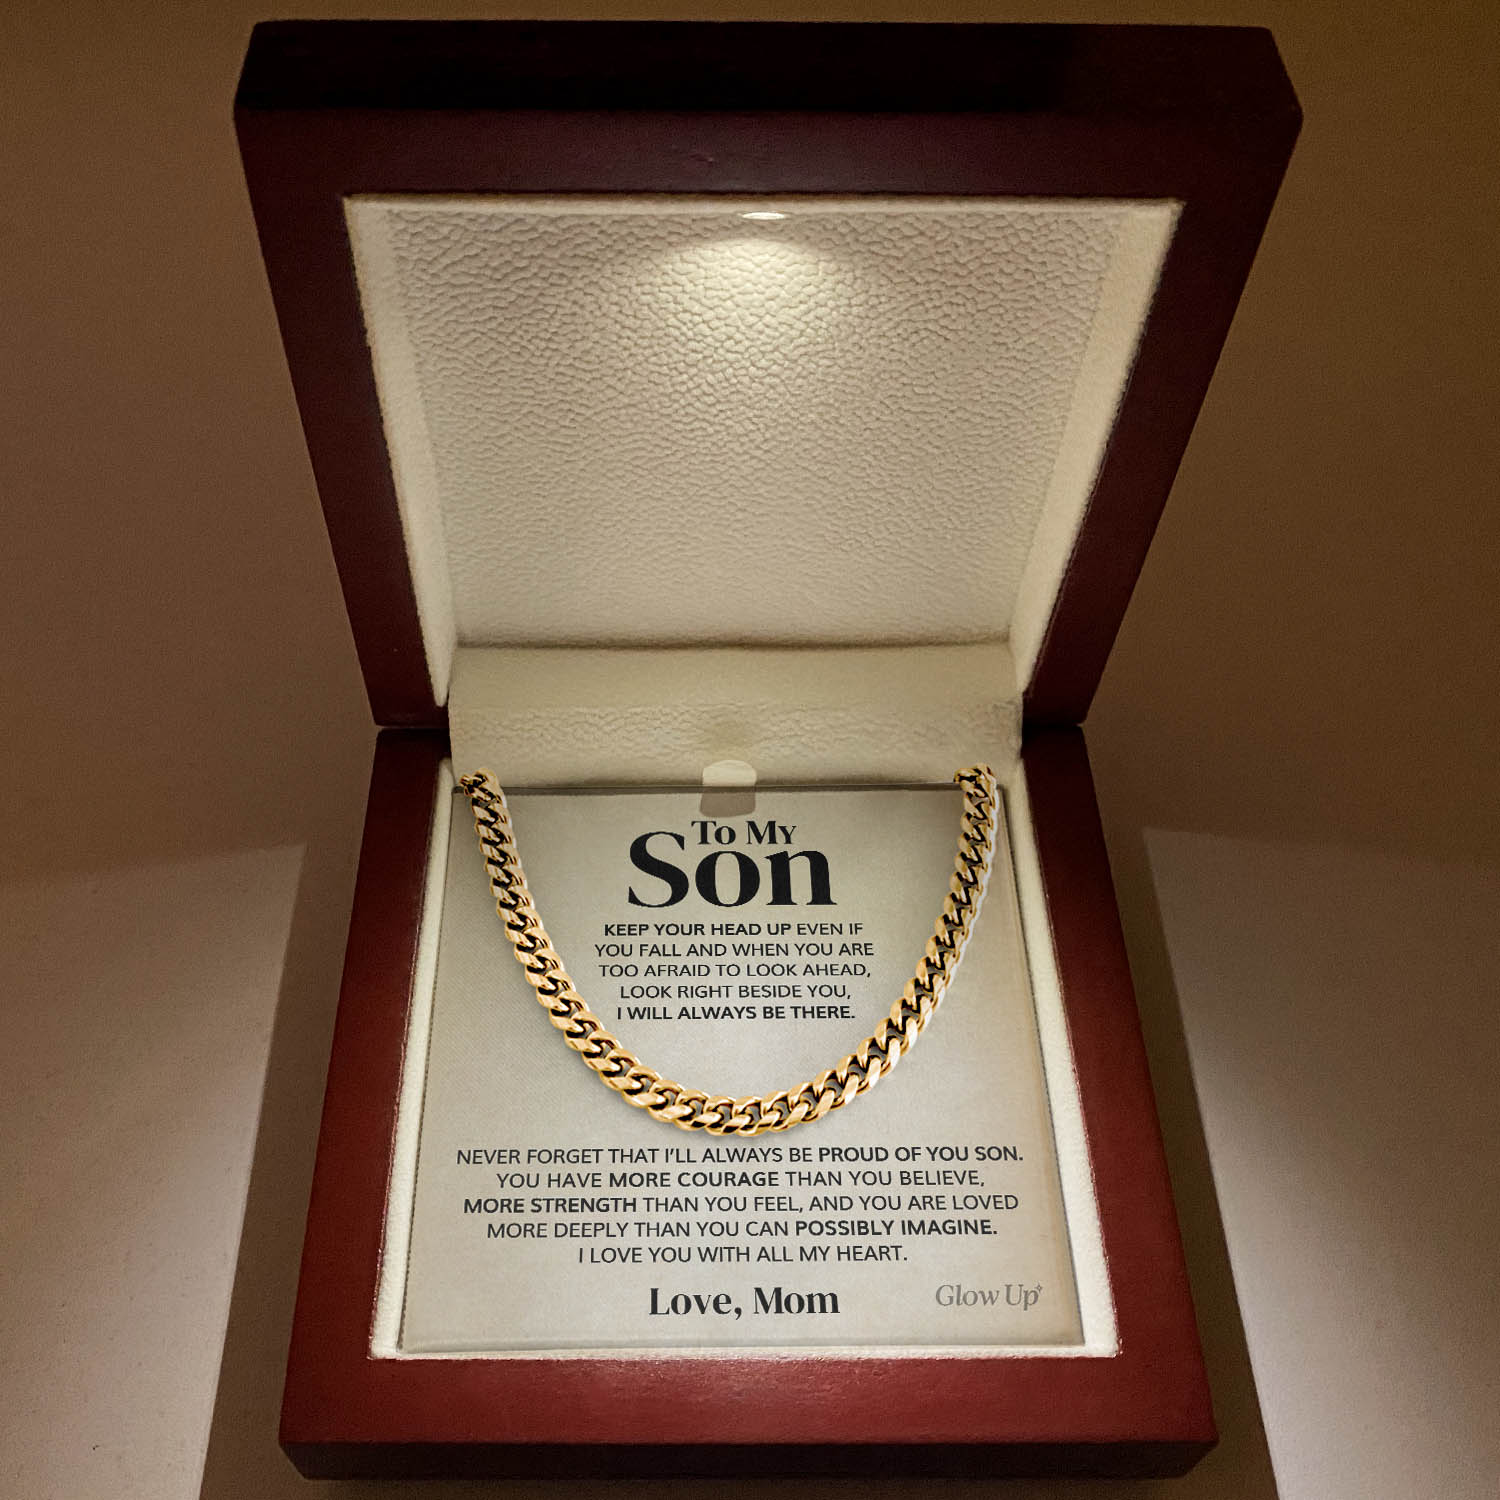 ShineOn Fulfillment Jewelry 14K Yellow Gold Finish / Luxury LED Box To my Son - Keep your head up - Cuban Link Chain Necklace